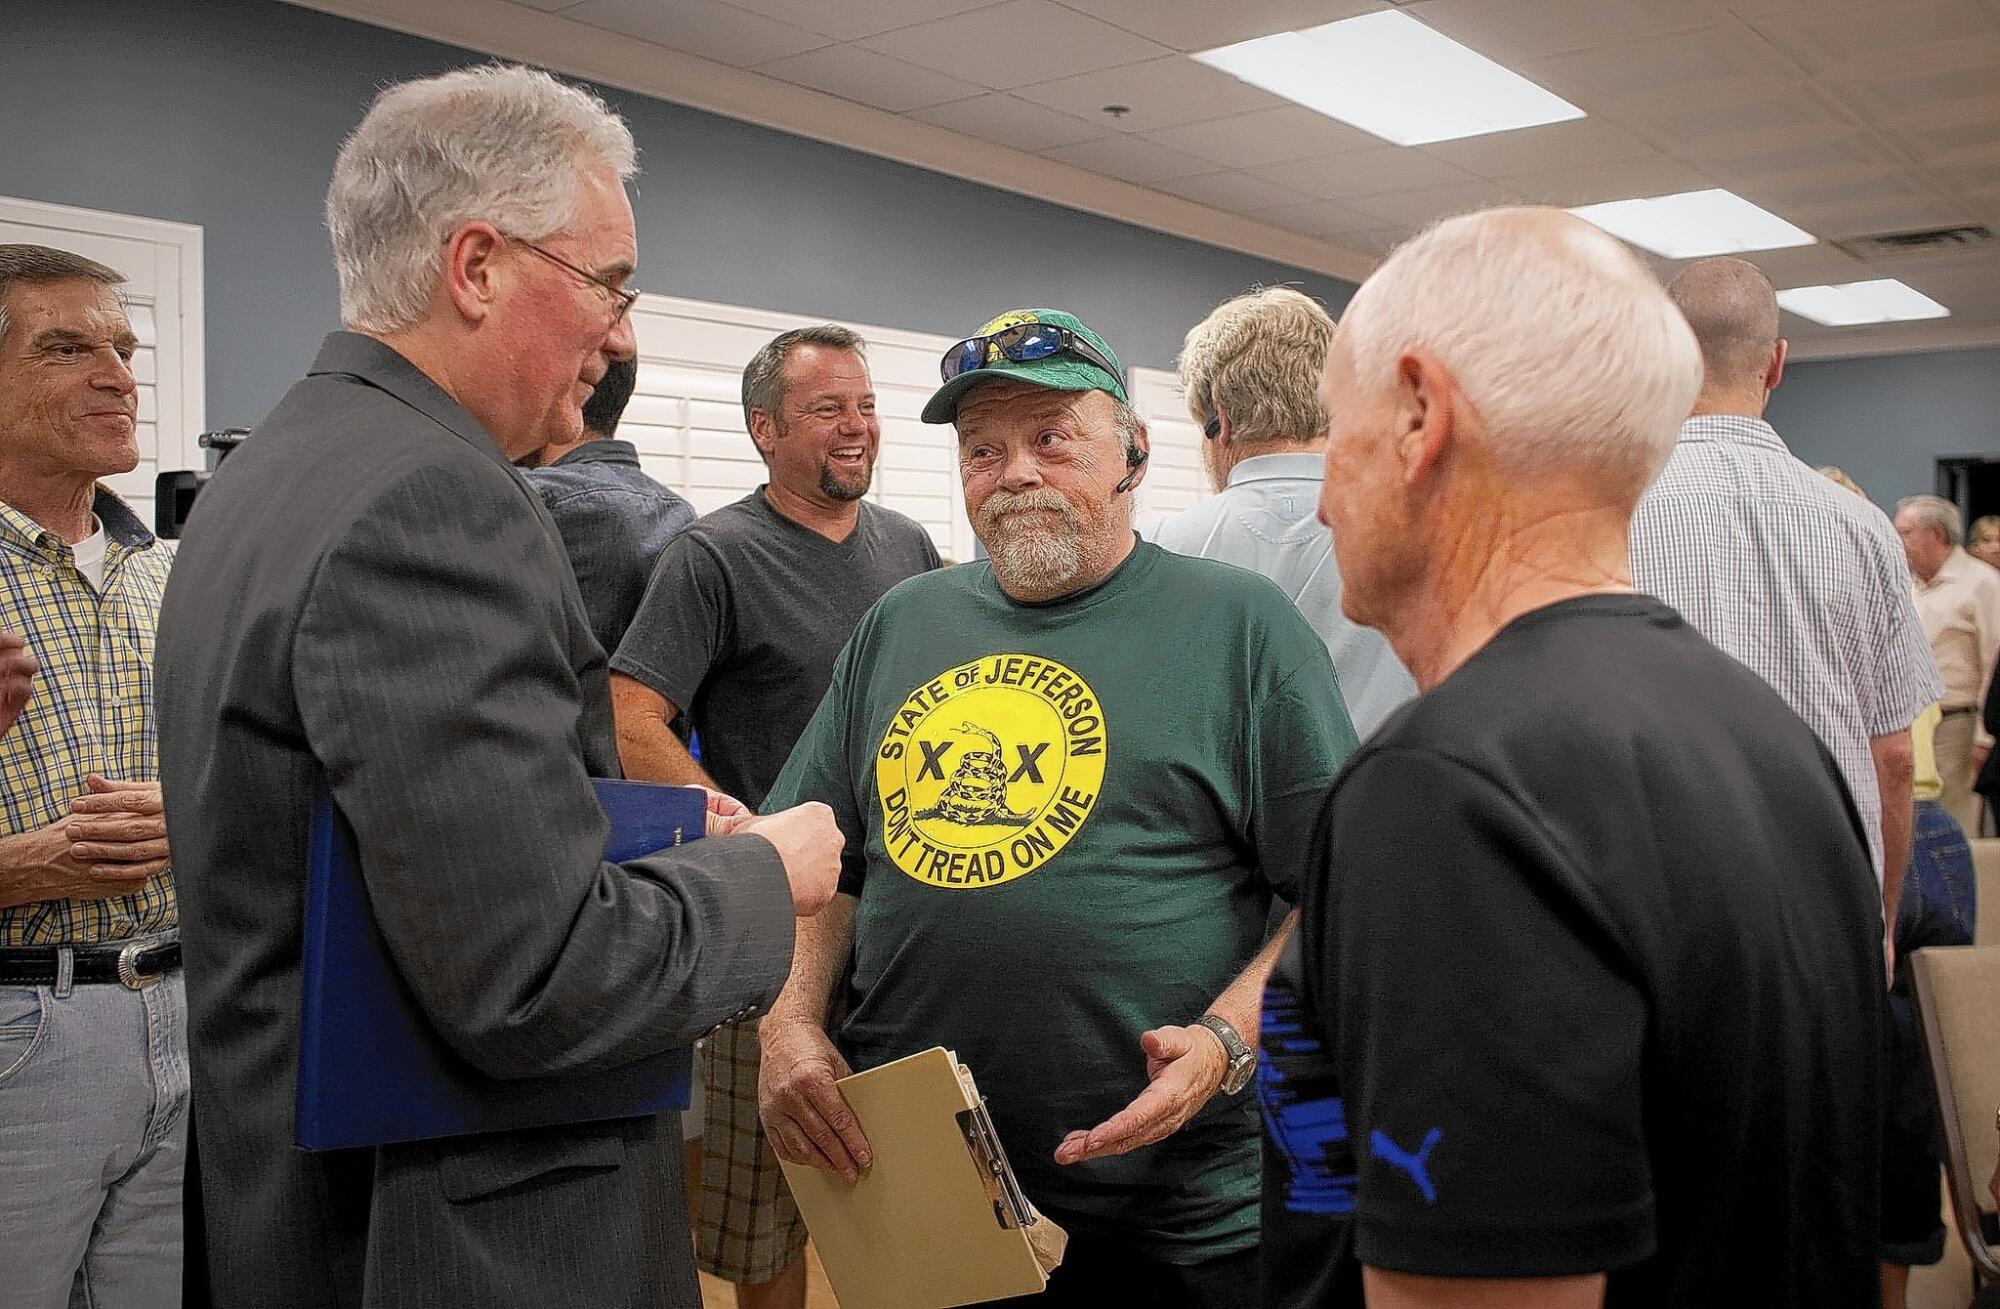 Rep. Tom McClintock, left, talks with voters after speaking to a tea tarty group in Rocklin, Calif.